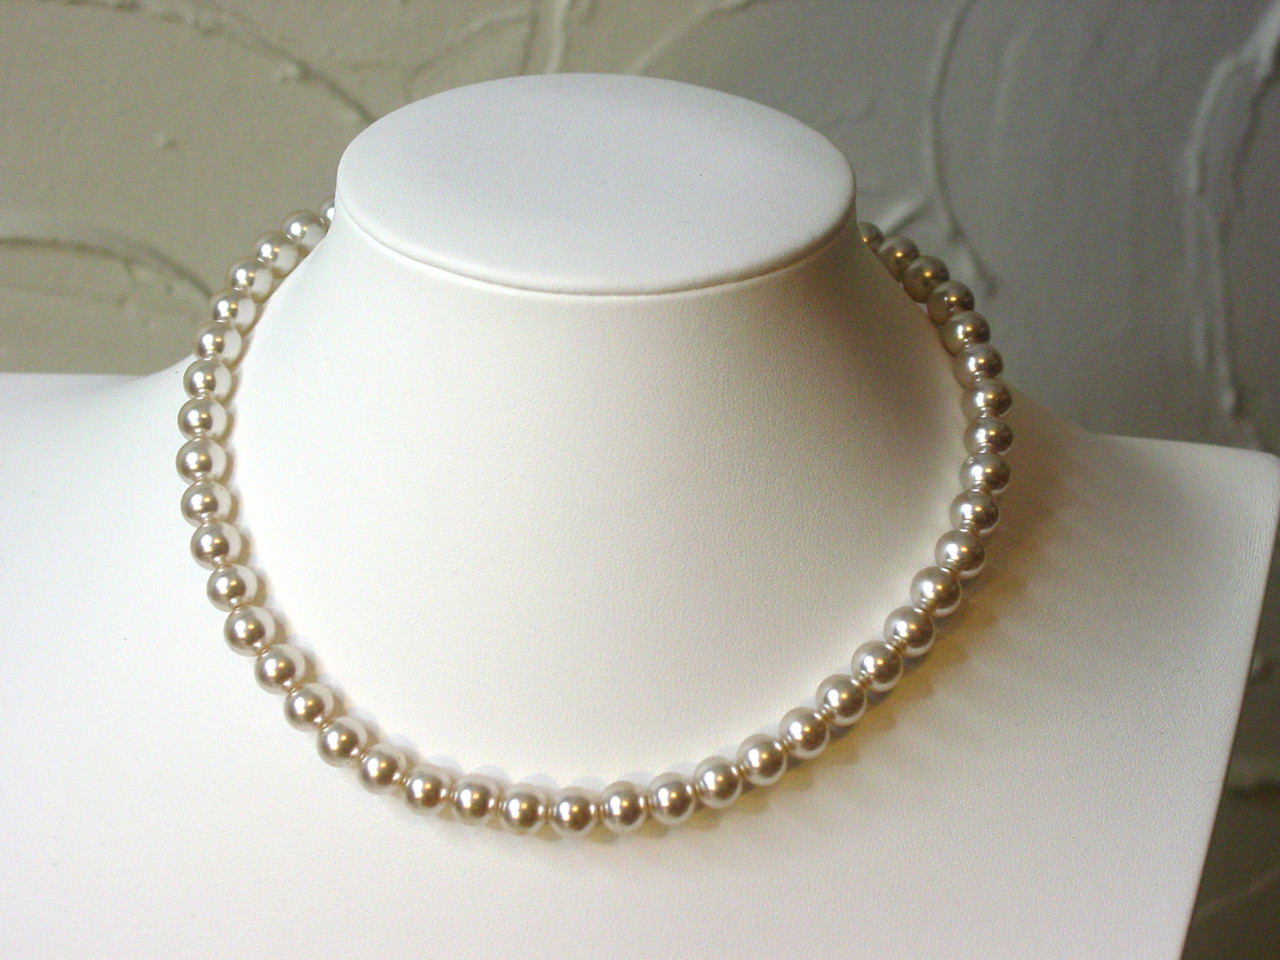 1950's - 1960's Japan Glass Pearl Necklace Rhinestone Clasp